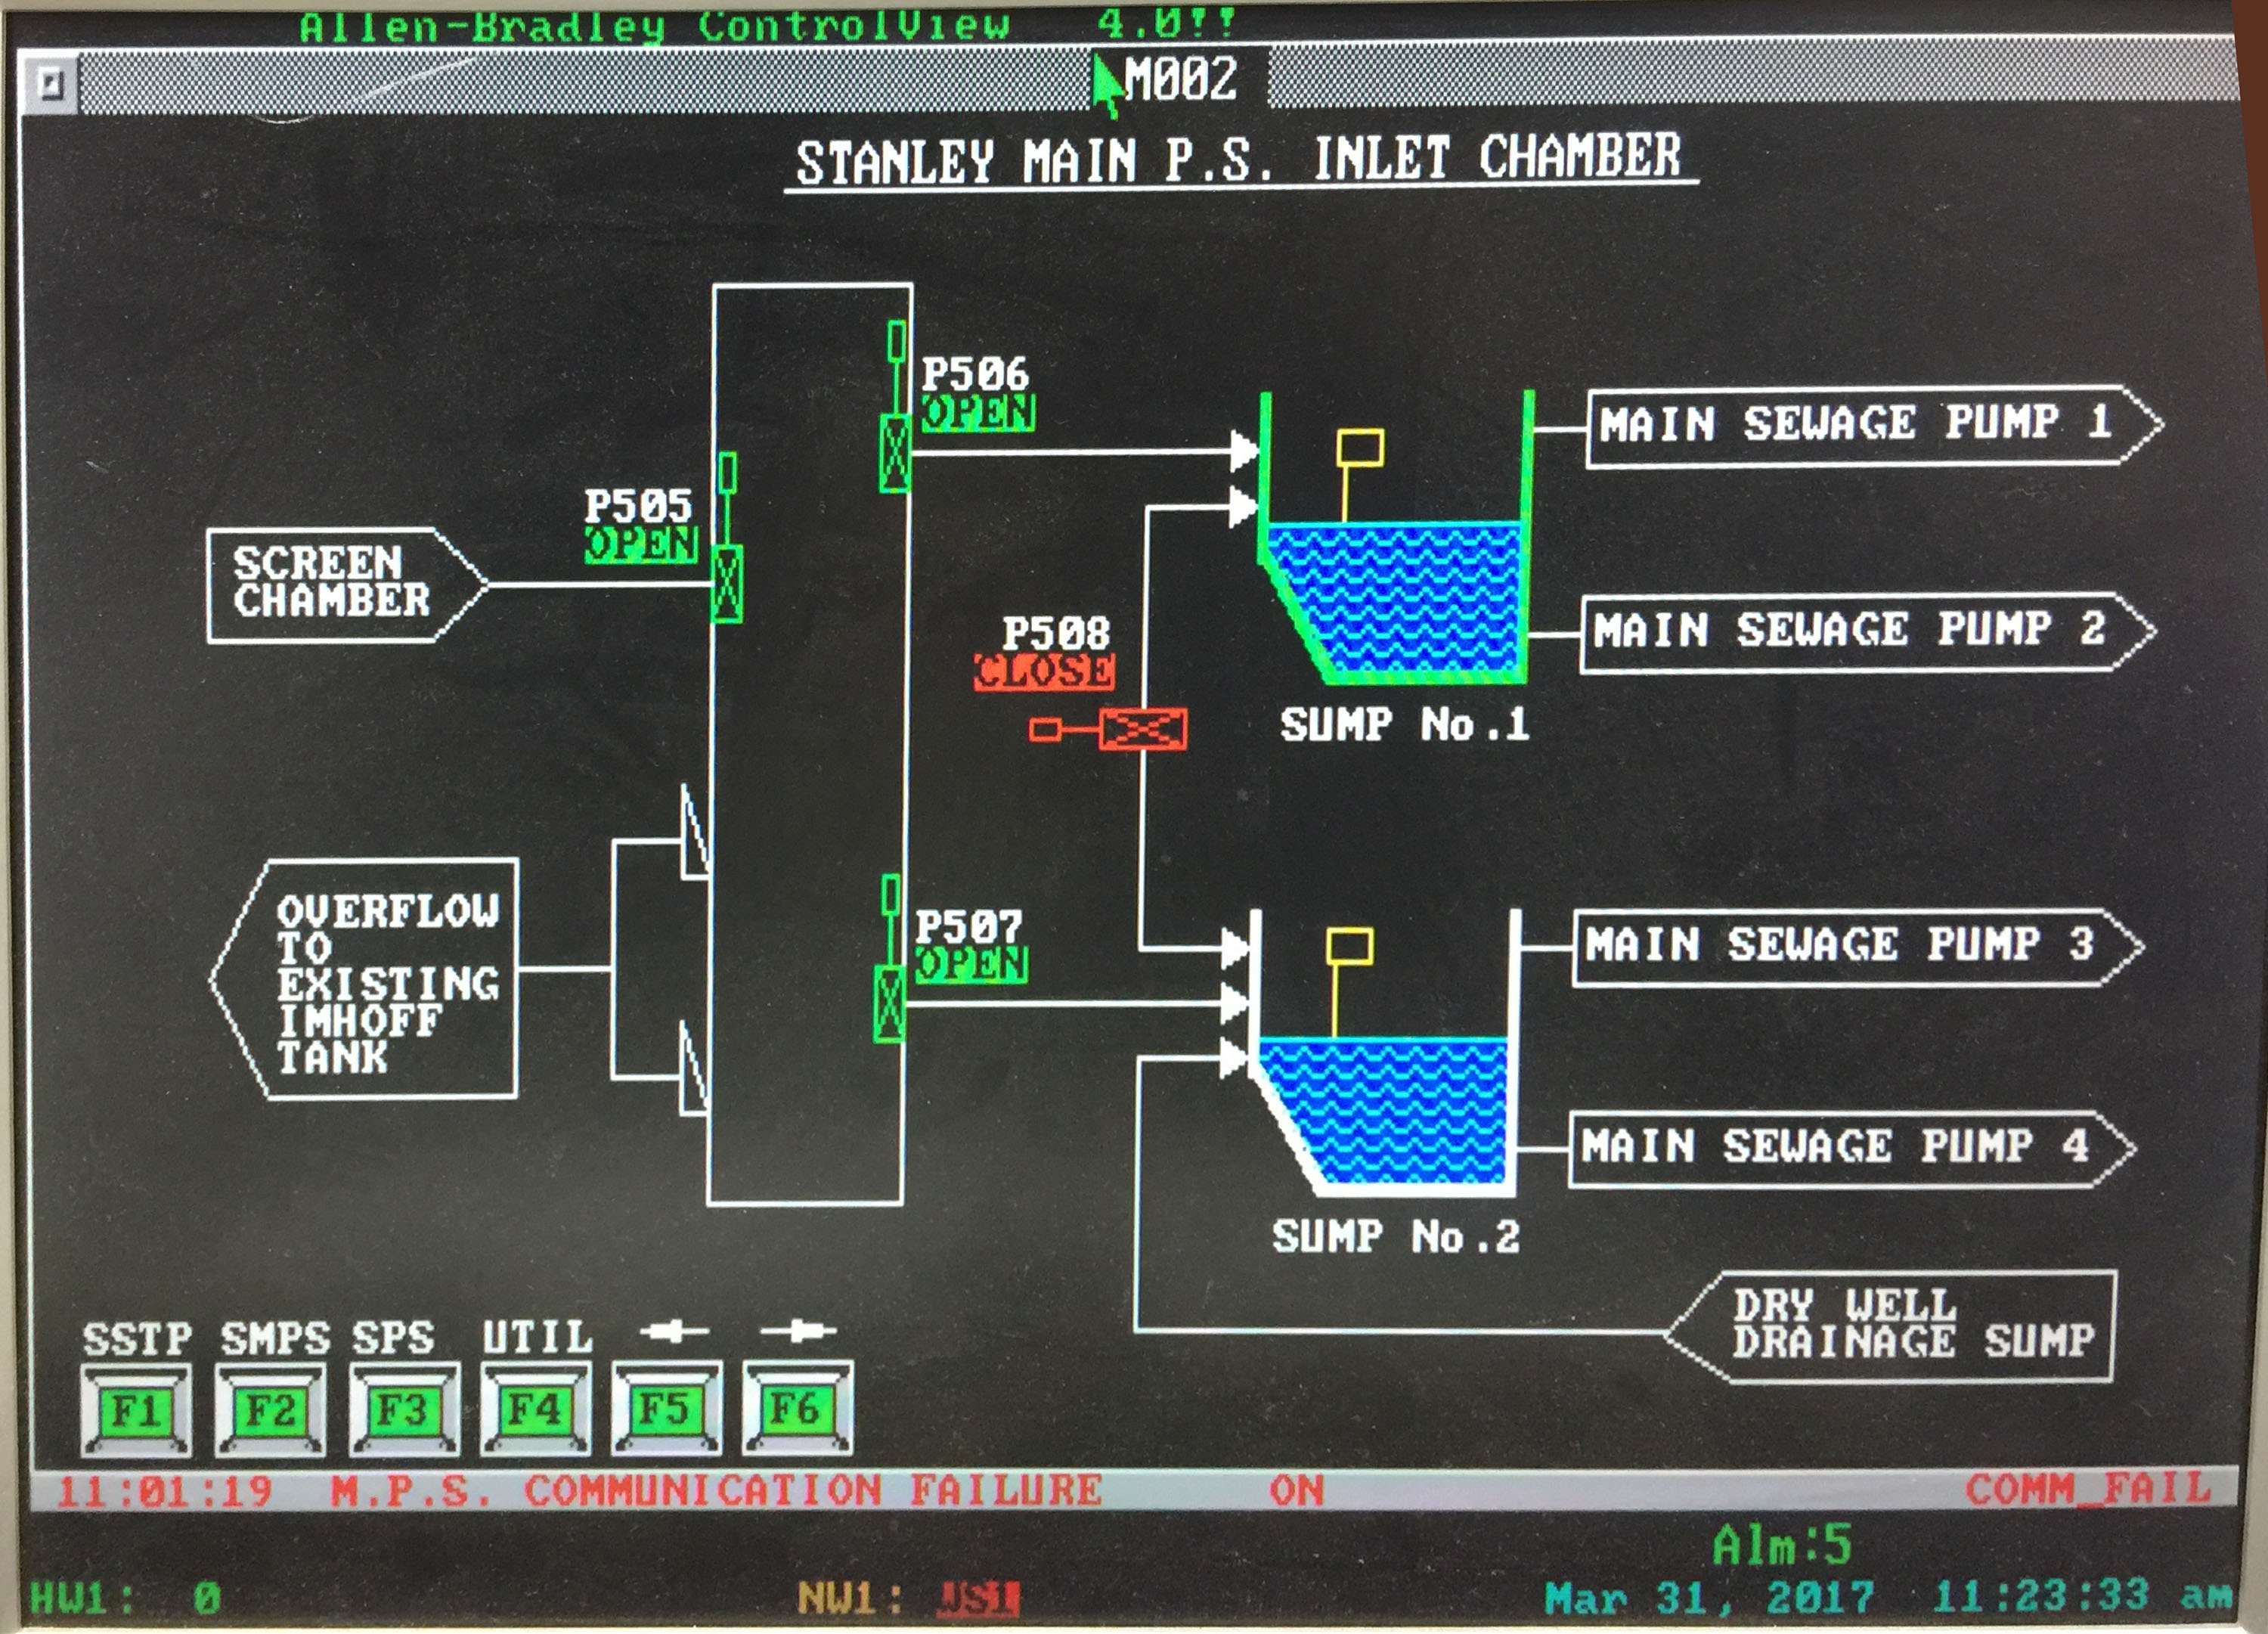 Part of Stanley Main Pumping Station Inlet Chamber screenshot from ControlView Before Works in DSD Stanley STW (Typical)